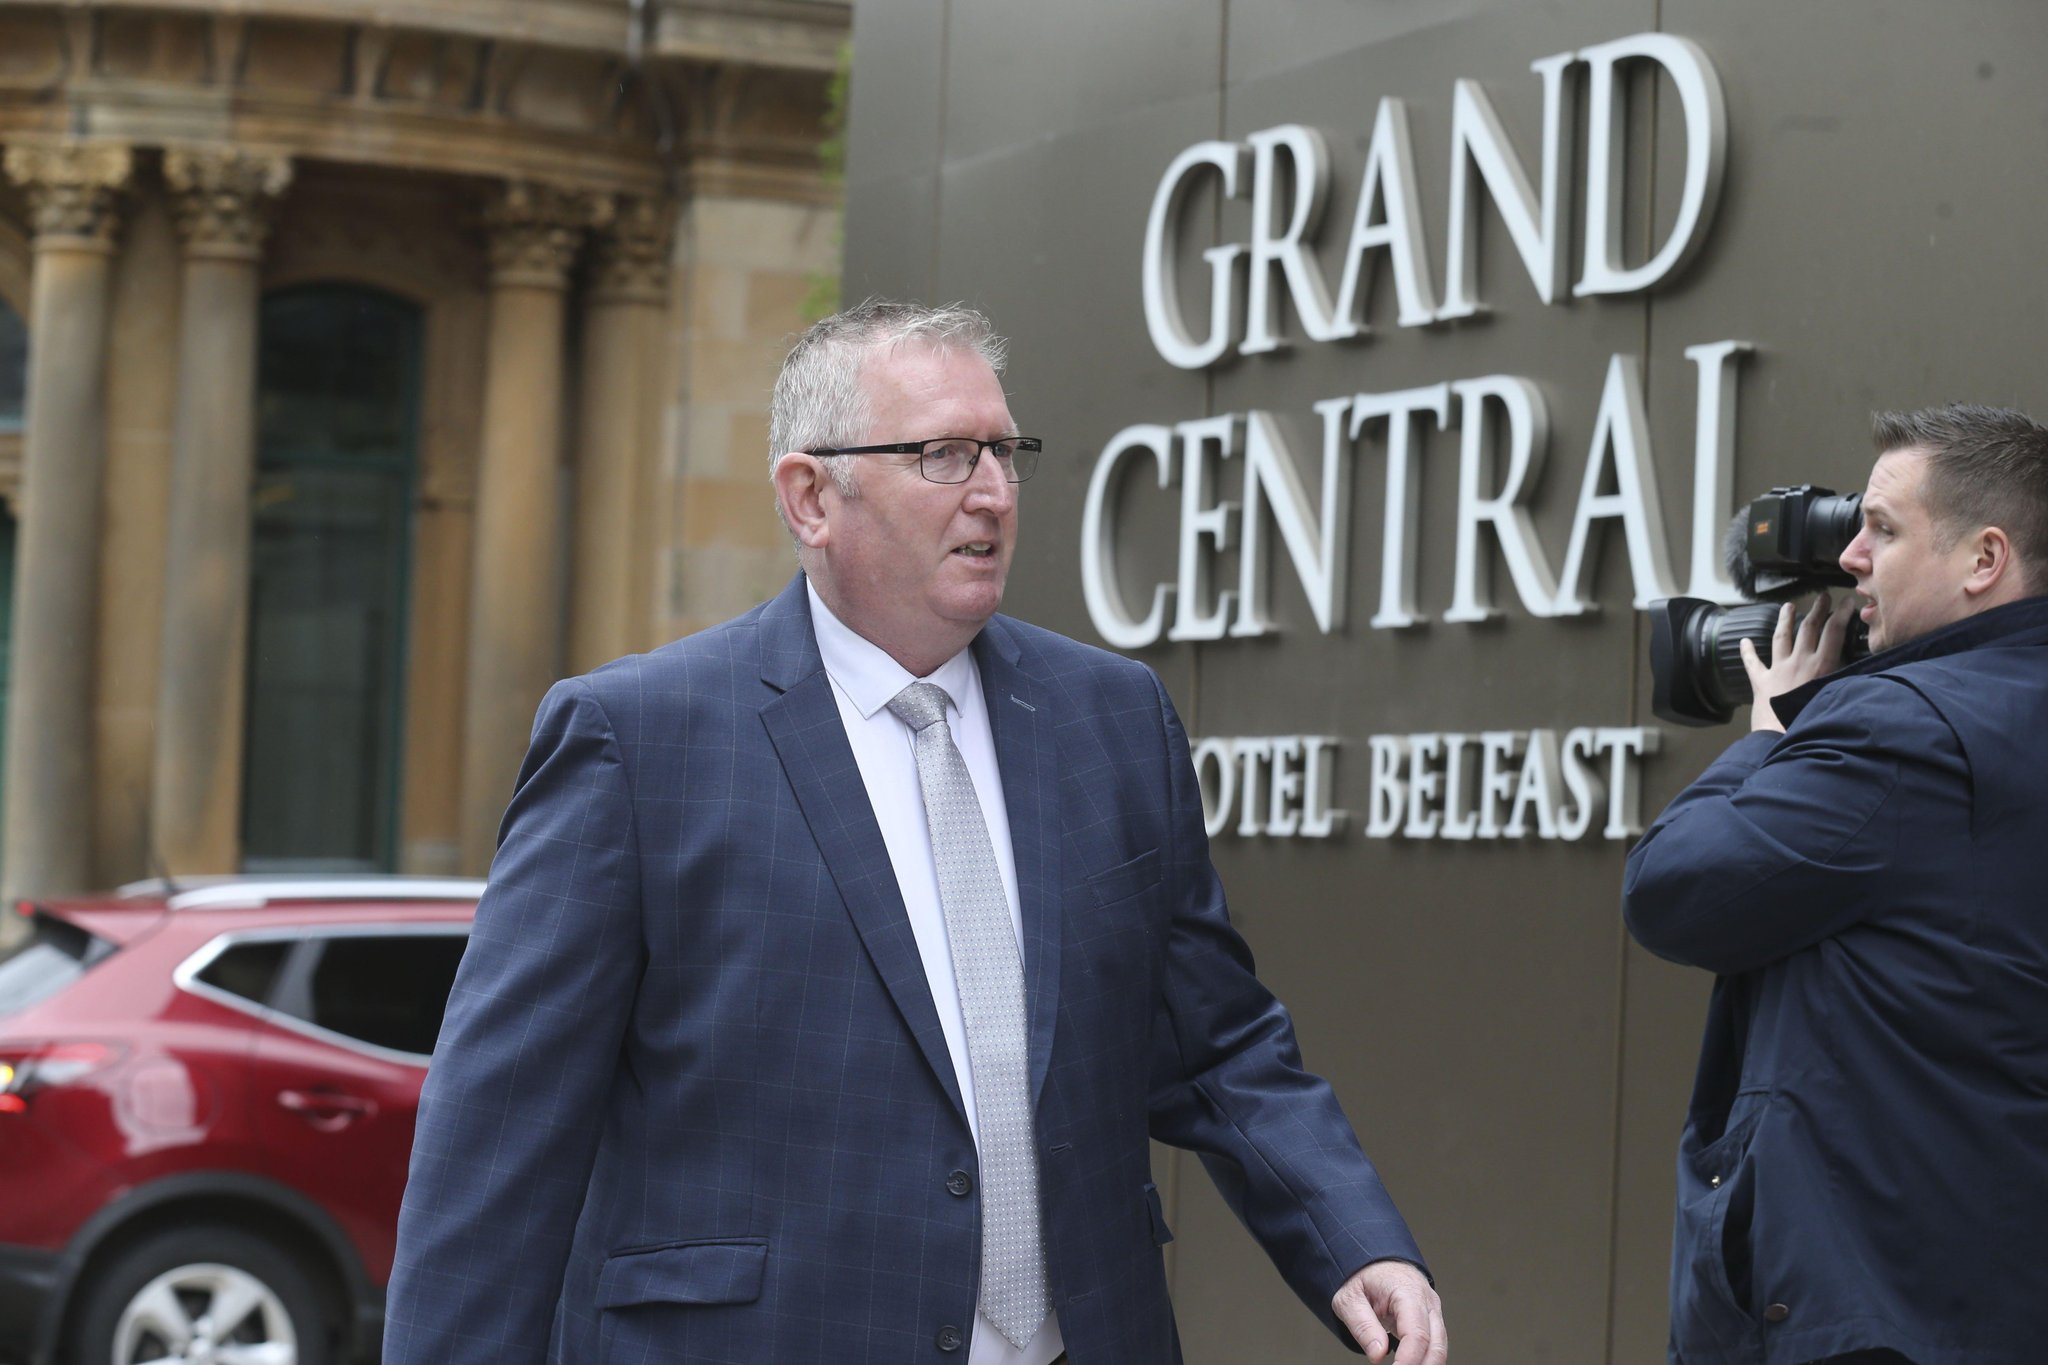 UUP leader would support legislation to stop blocking of Assembly Speaker